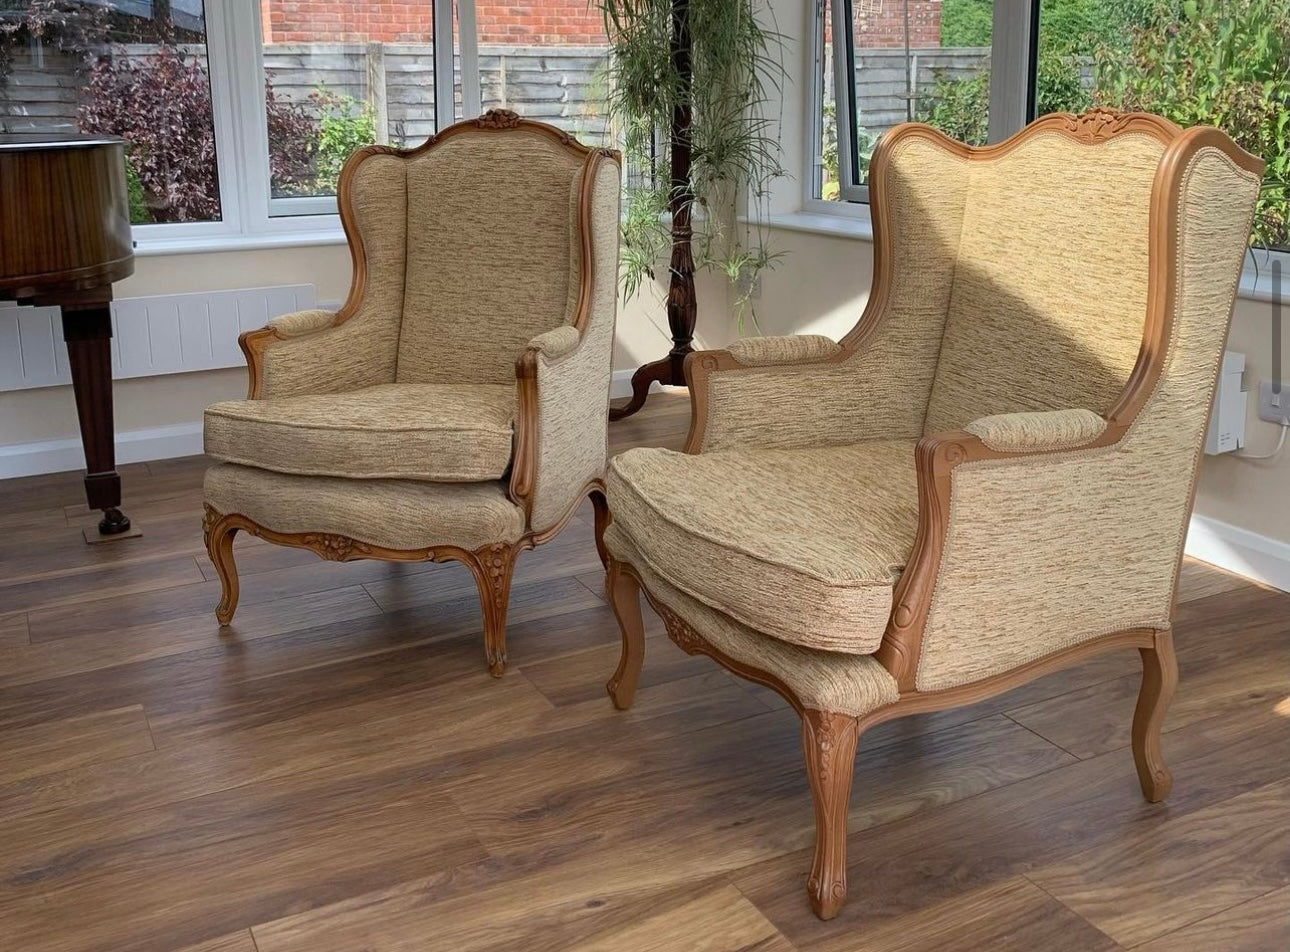 Wingback Chairs: A Sentimental Story